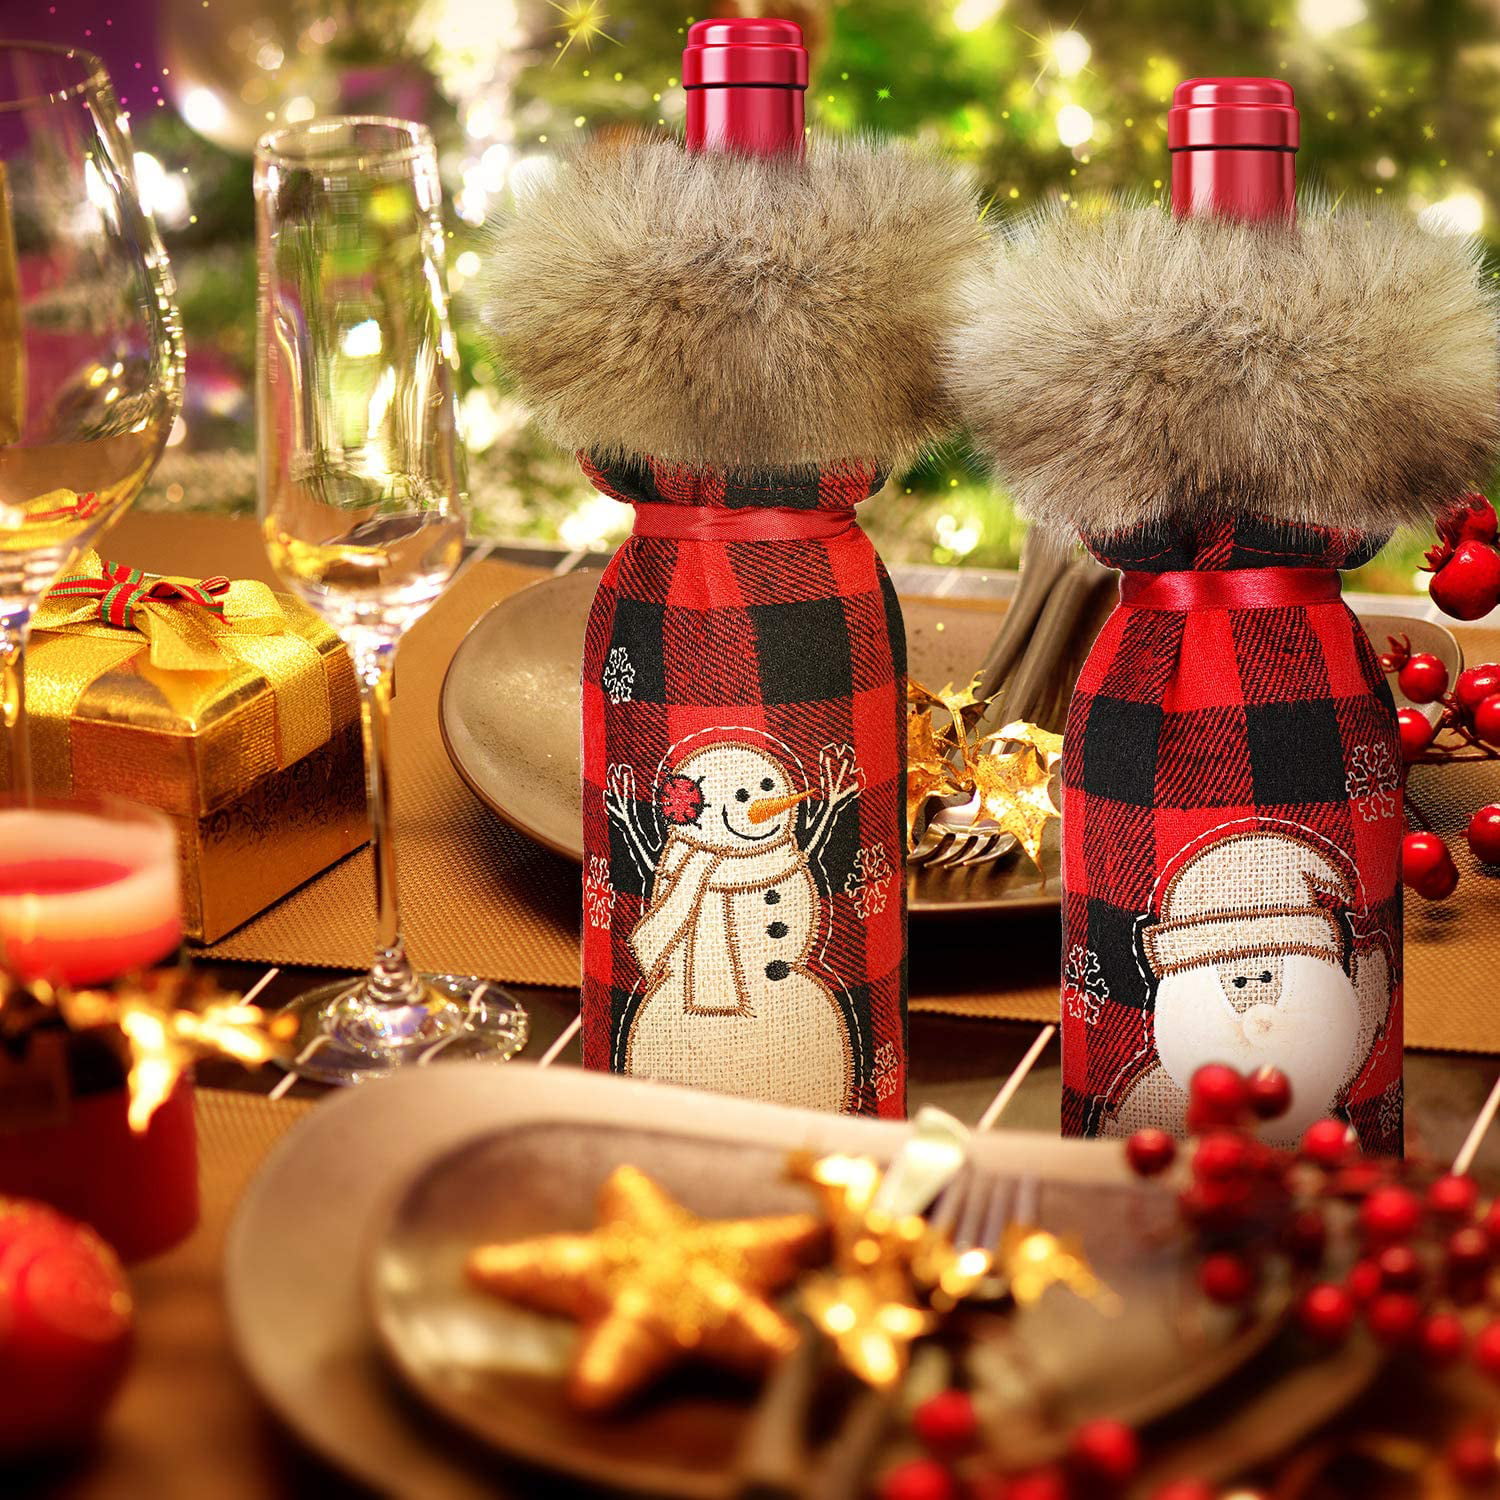 6 Pieces Christmas Buffalo Plaid Wine Bottle Cover Decorative Wine Bottle Sweater with Faux Fur Collar Holder Bags for Xmas Party Decoration 